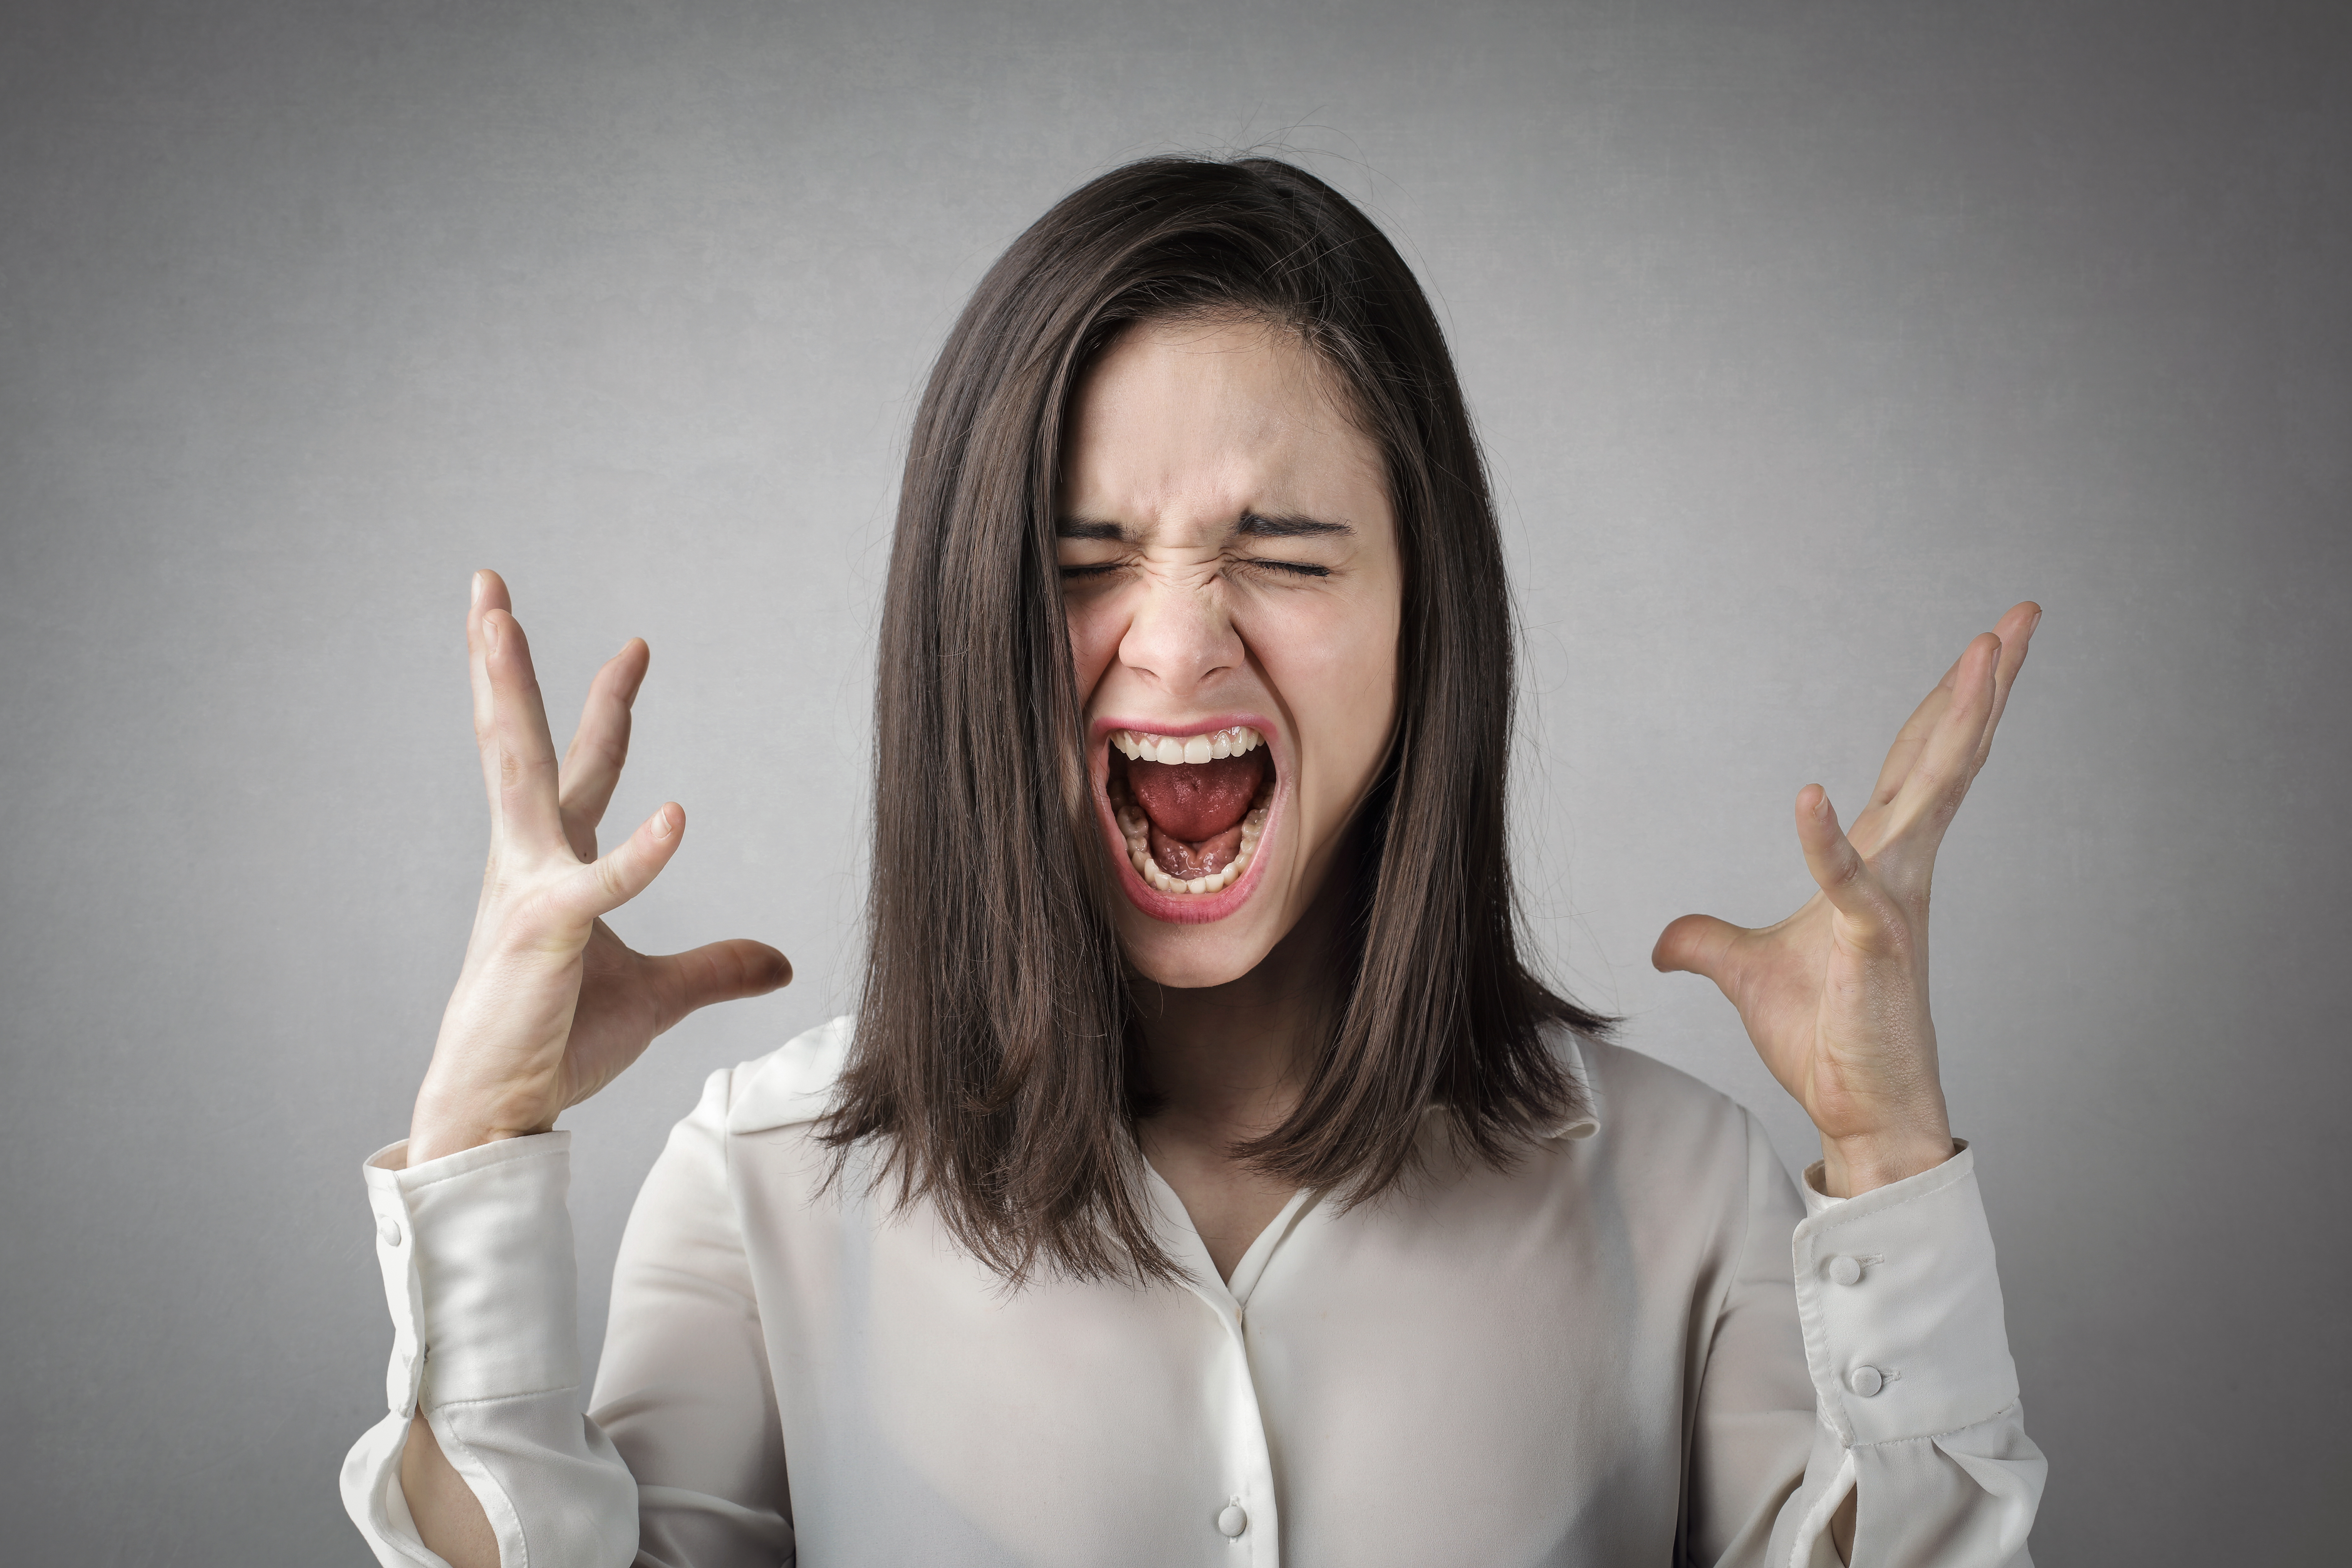 An angry woman | Source: Shutterstock